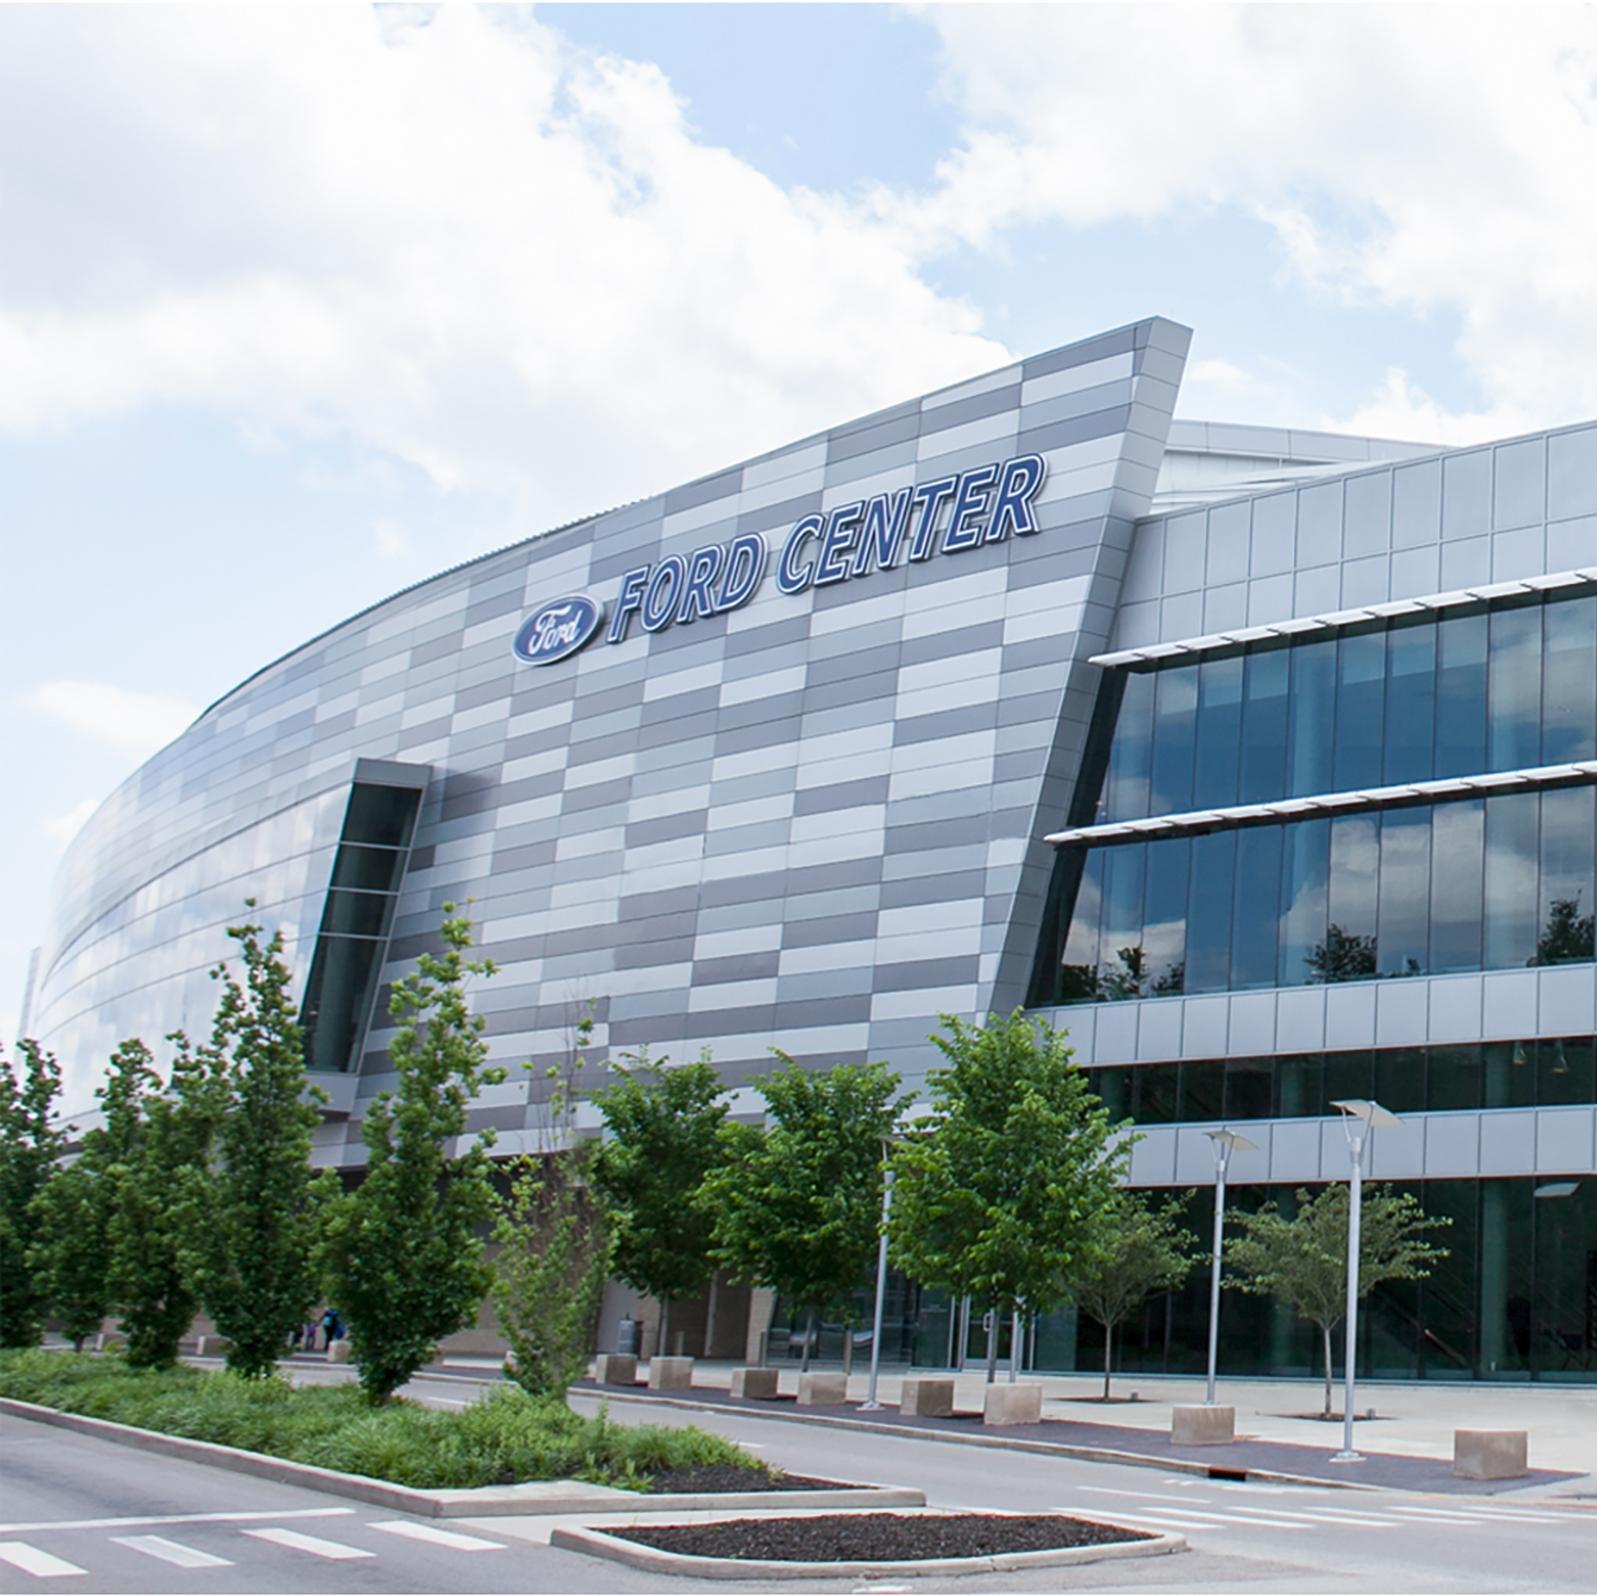 The Ford Center